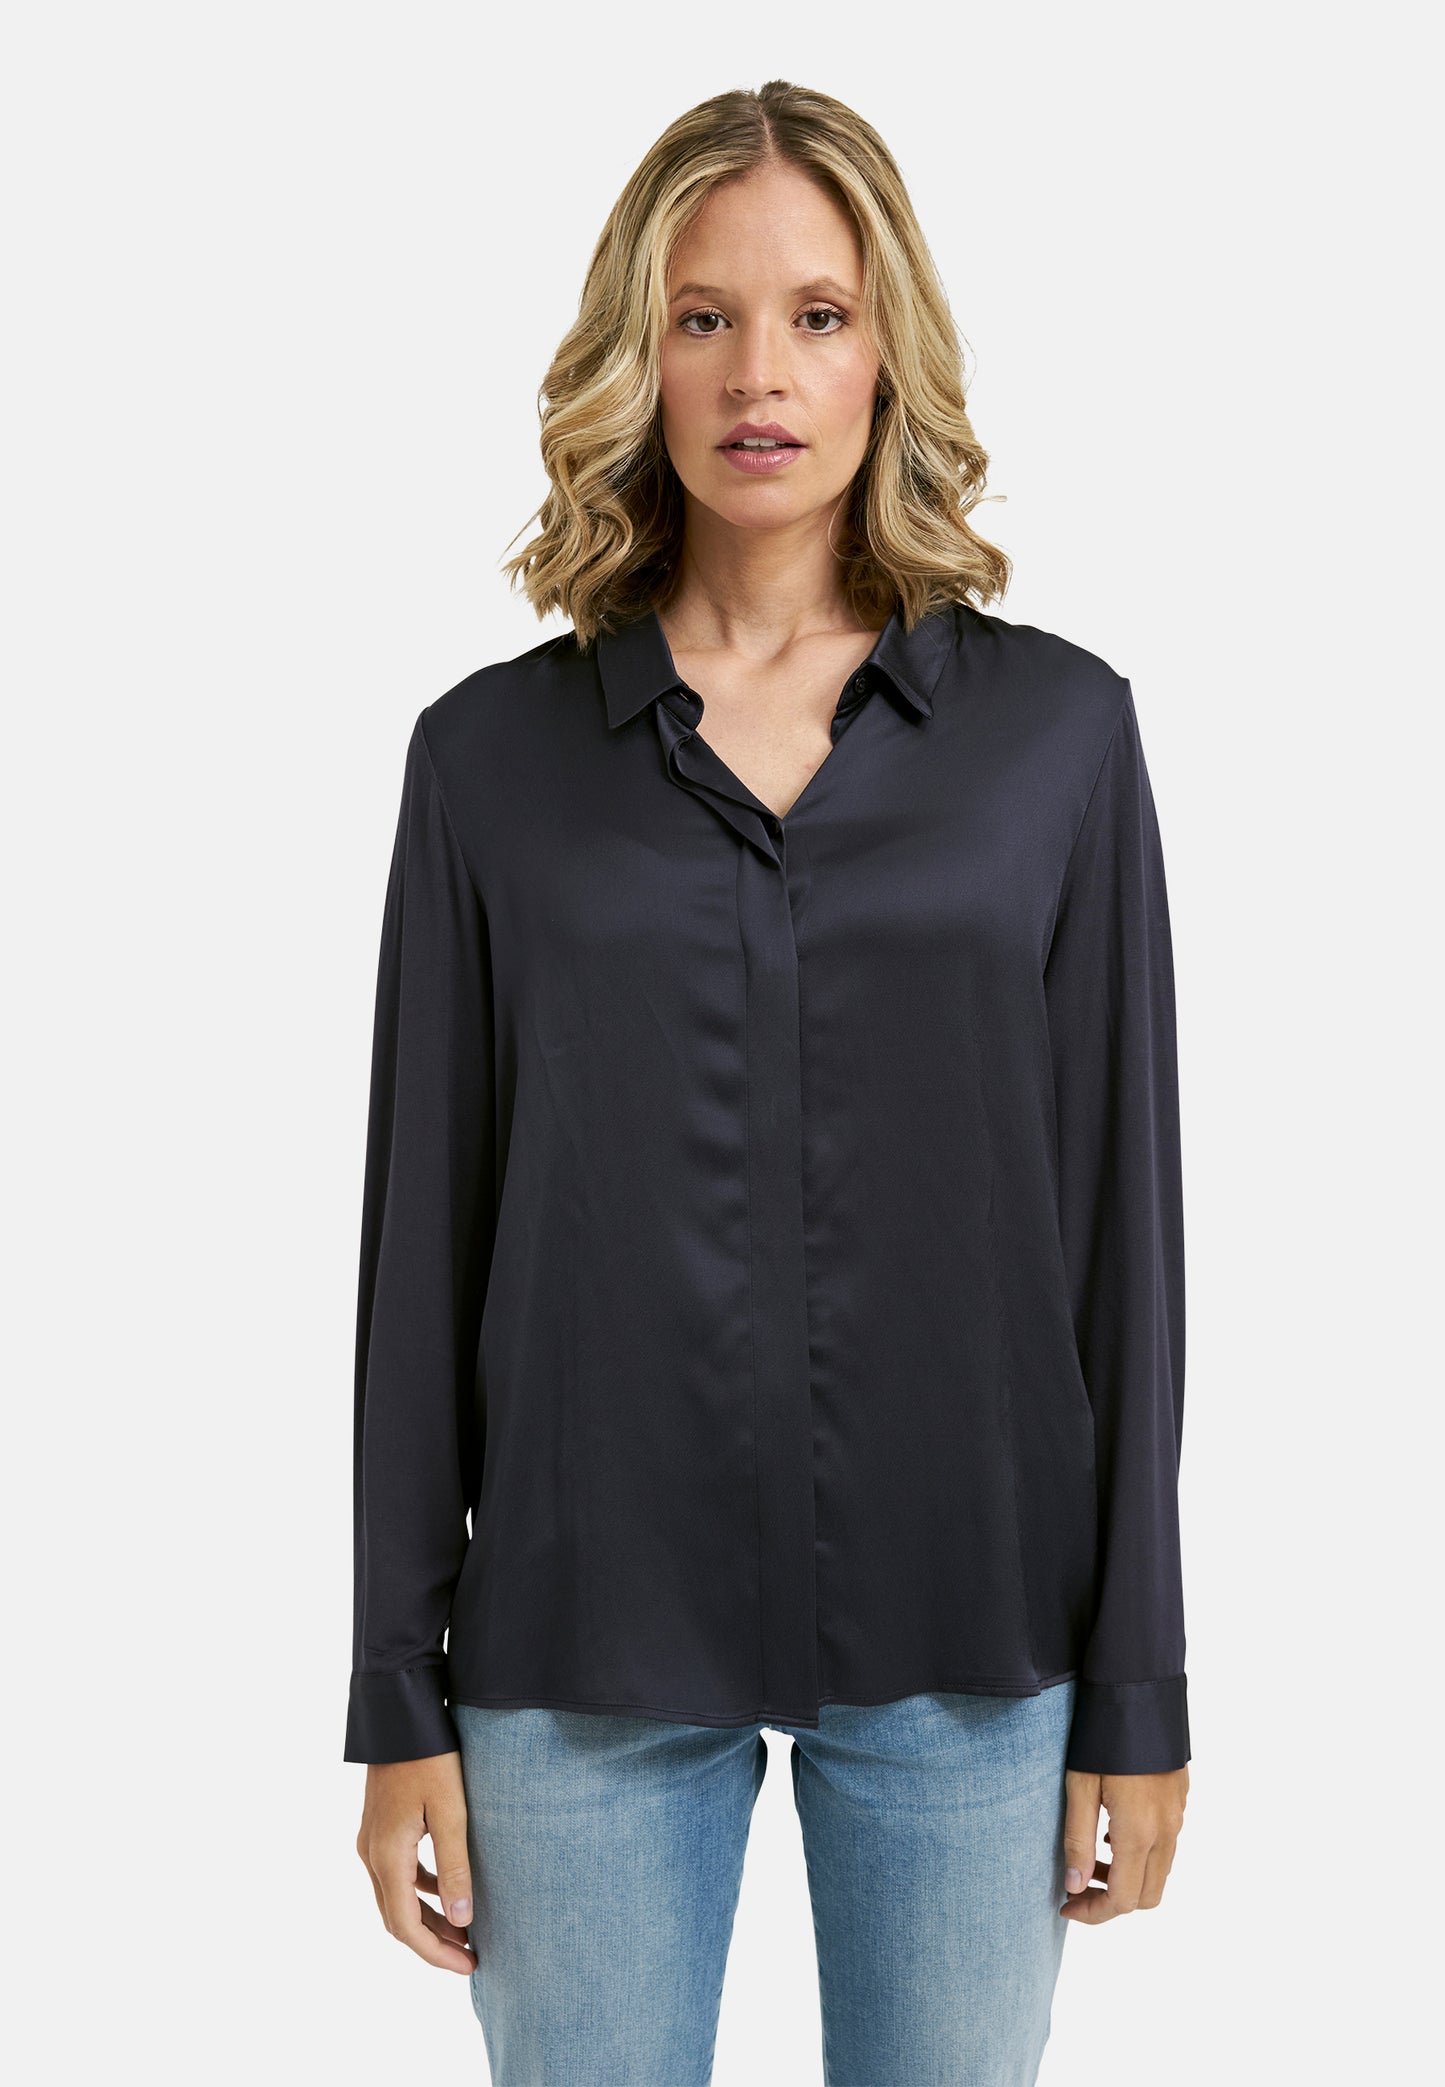 Blouse with collar, placket and 1/1 sleeves